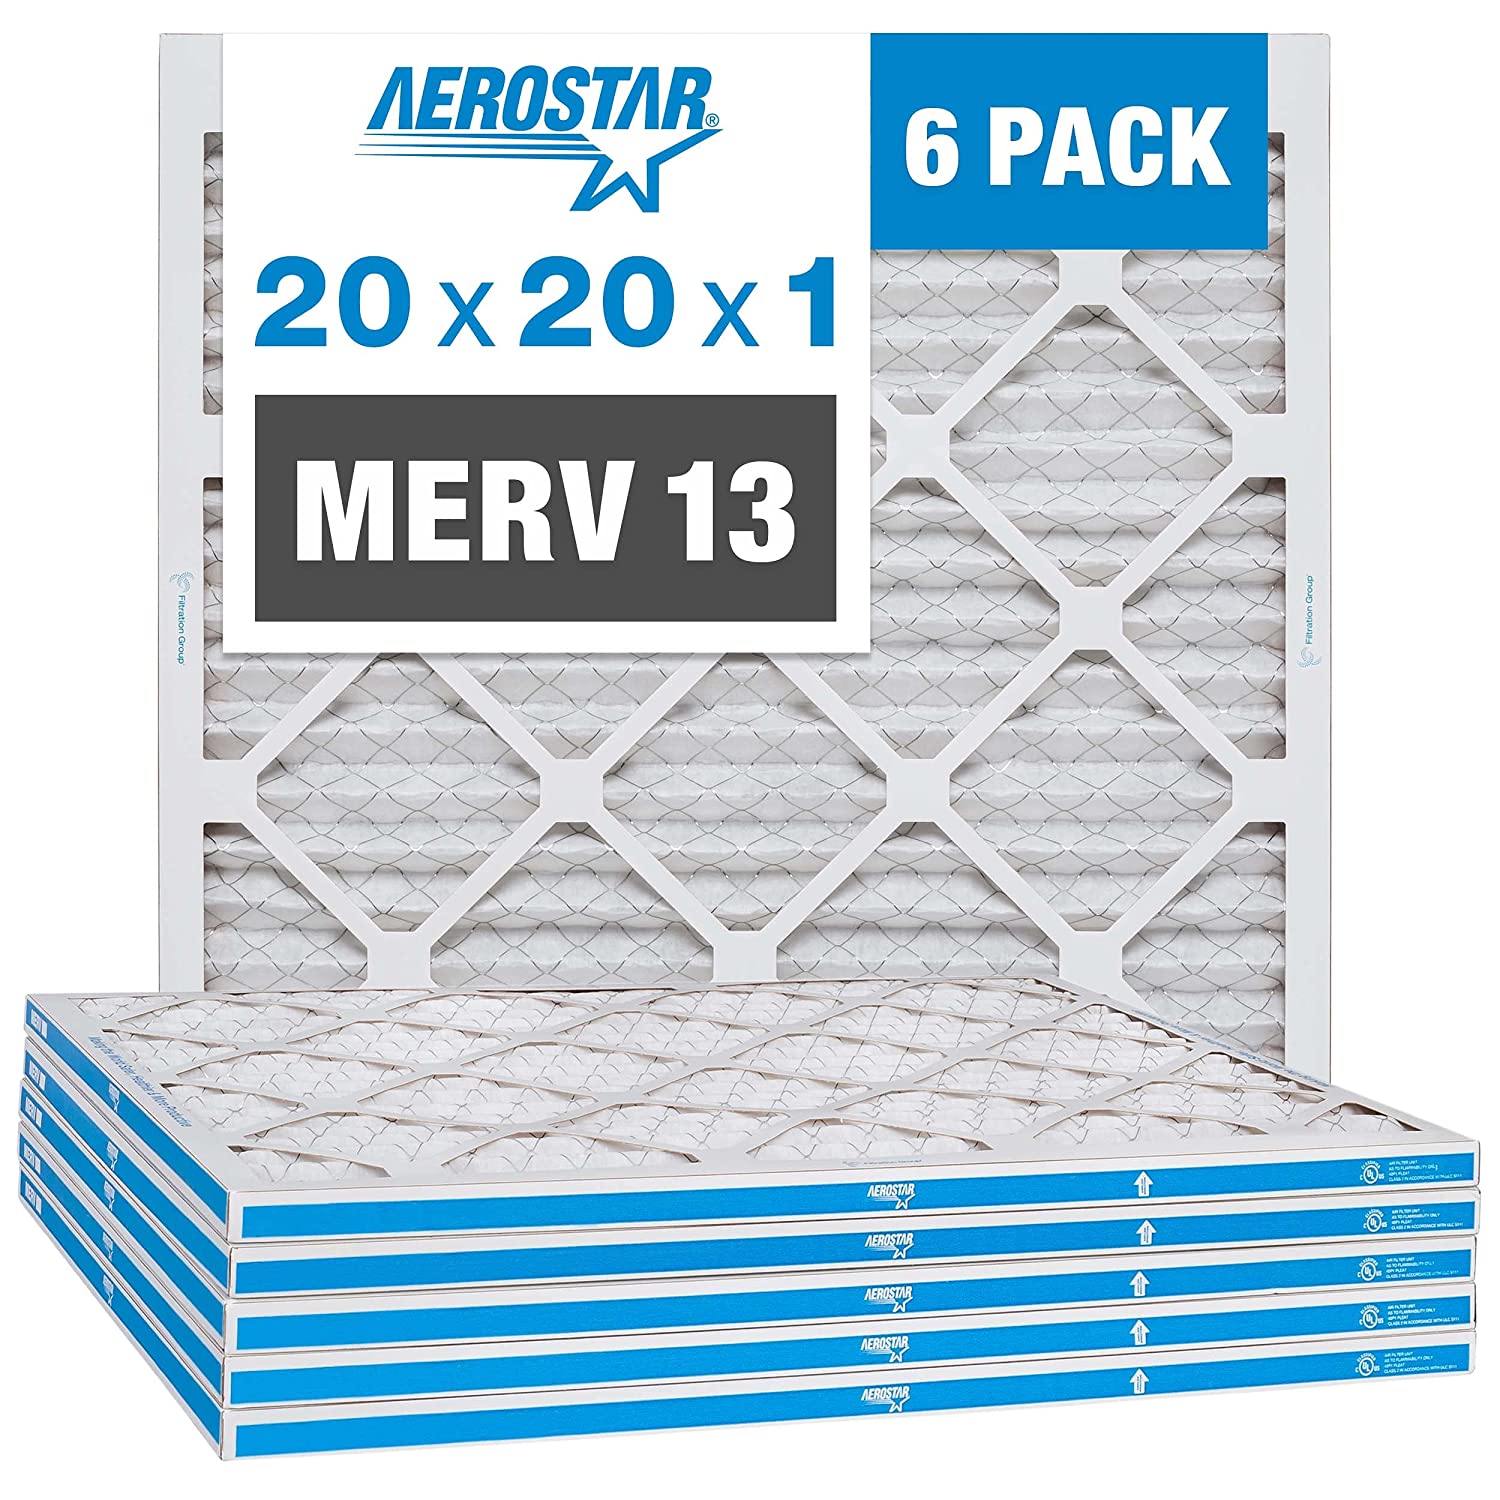 Amazon cold and flu MERV air filters